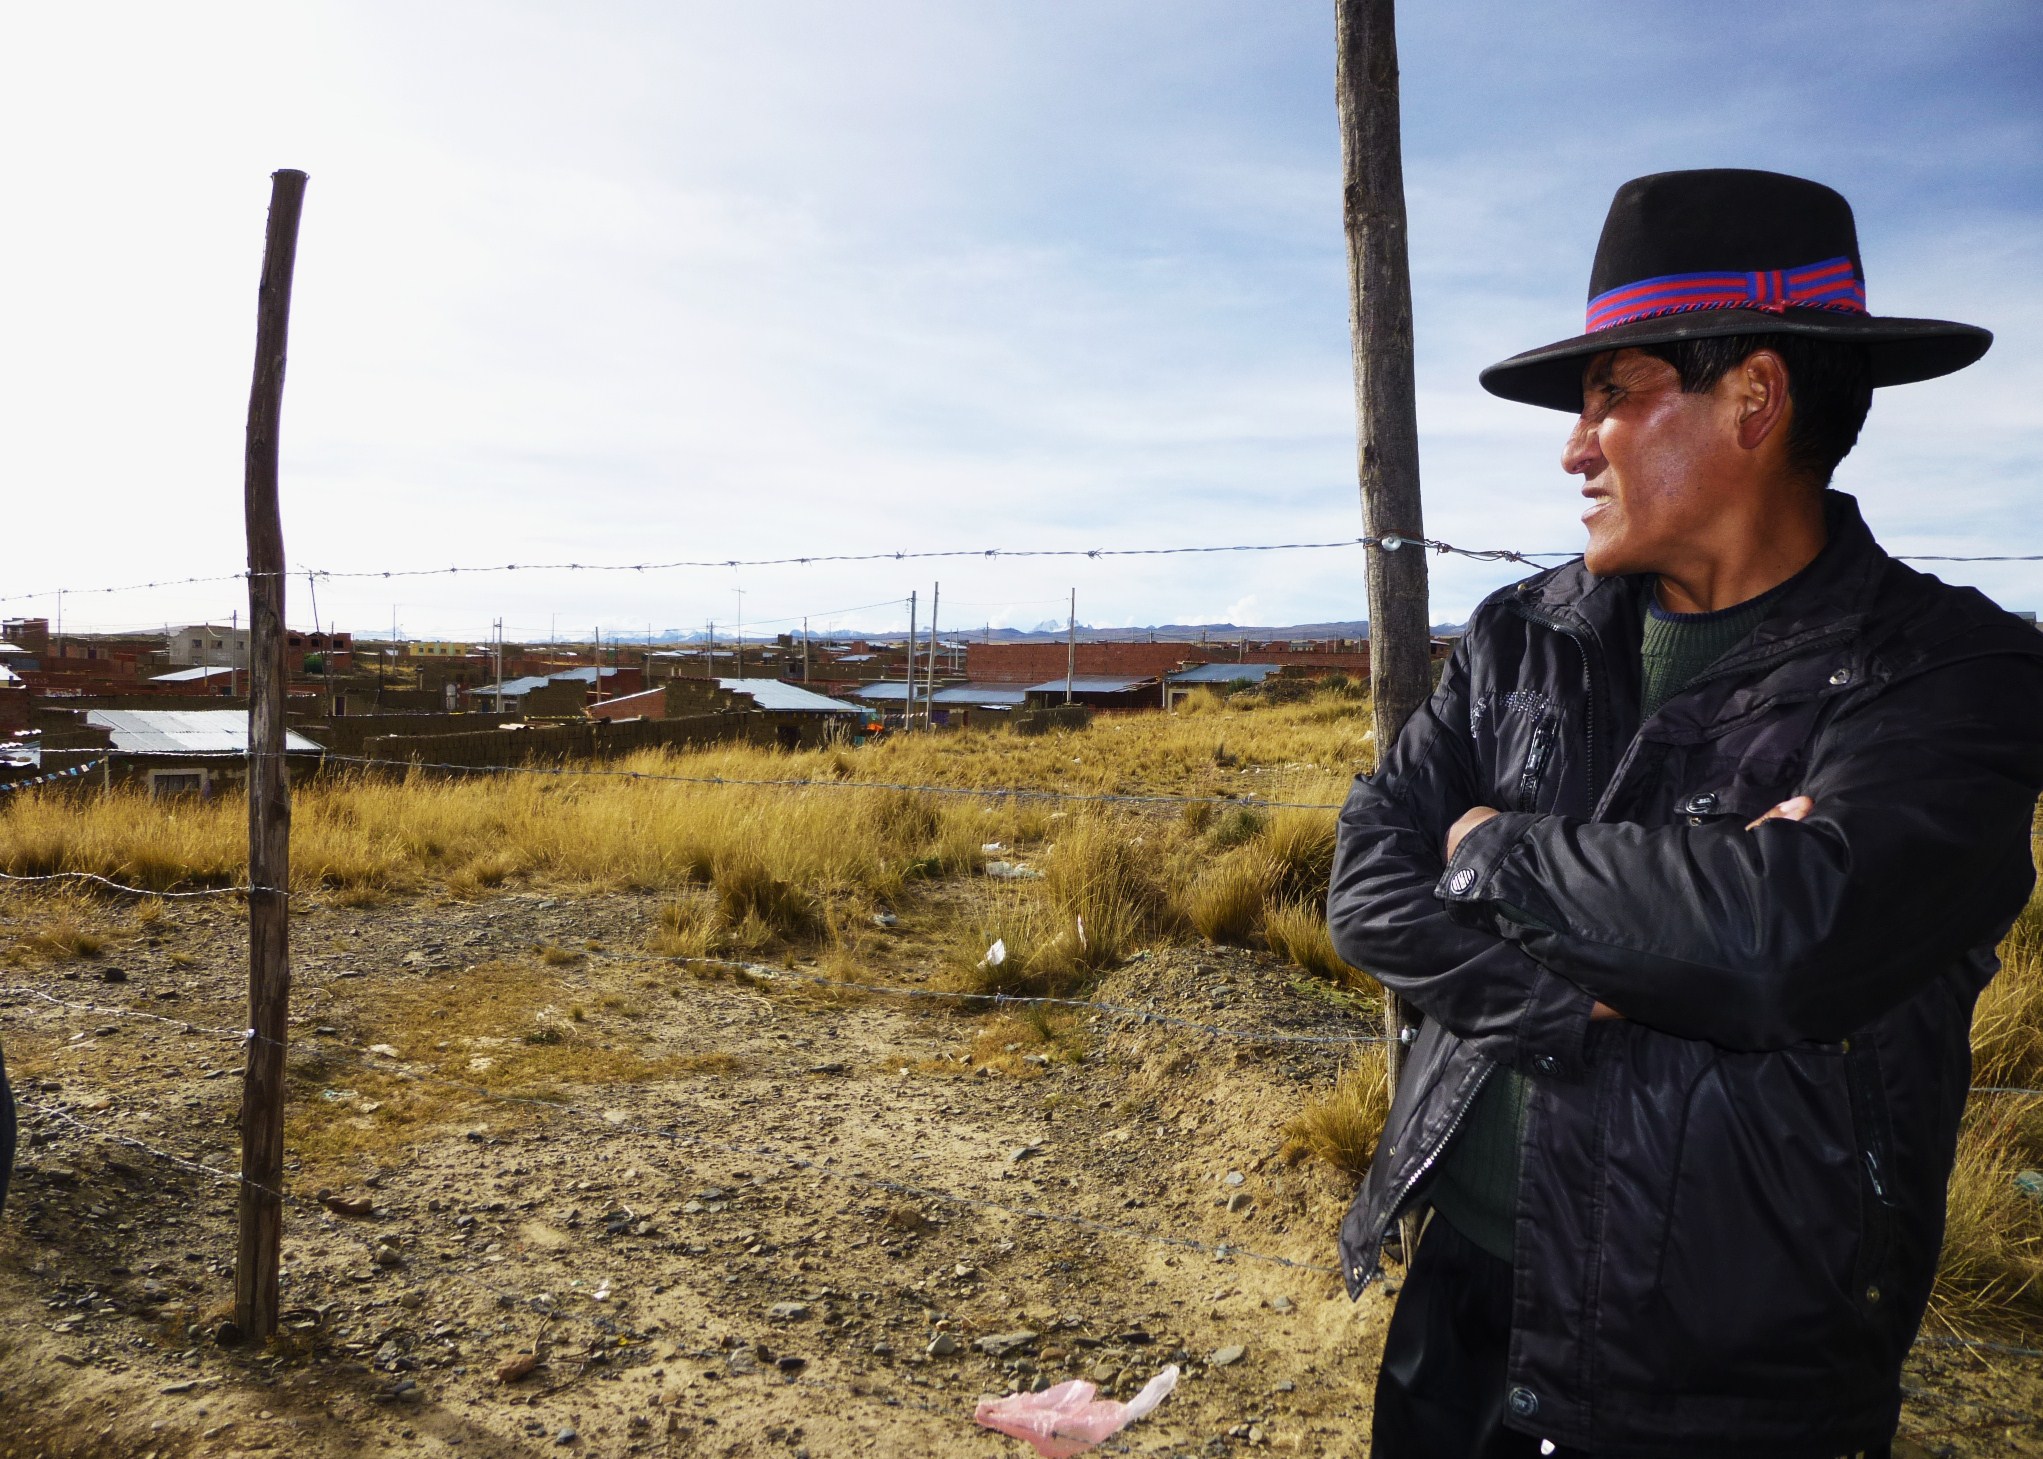 Ticona, police officer and neighborhood leader, at the limits of his neighborhood, El Alto, Bolivia. June 2013. Jorge Derpic.